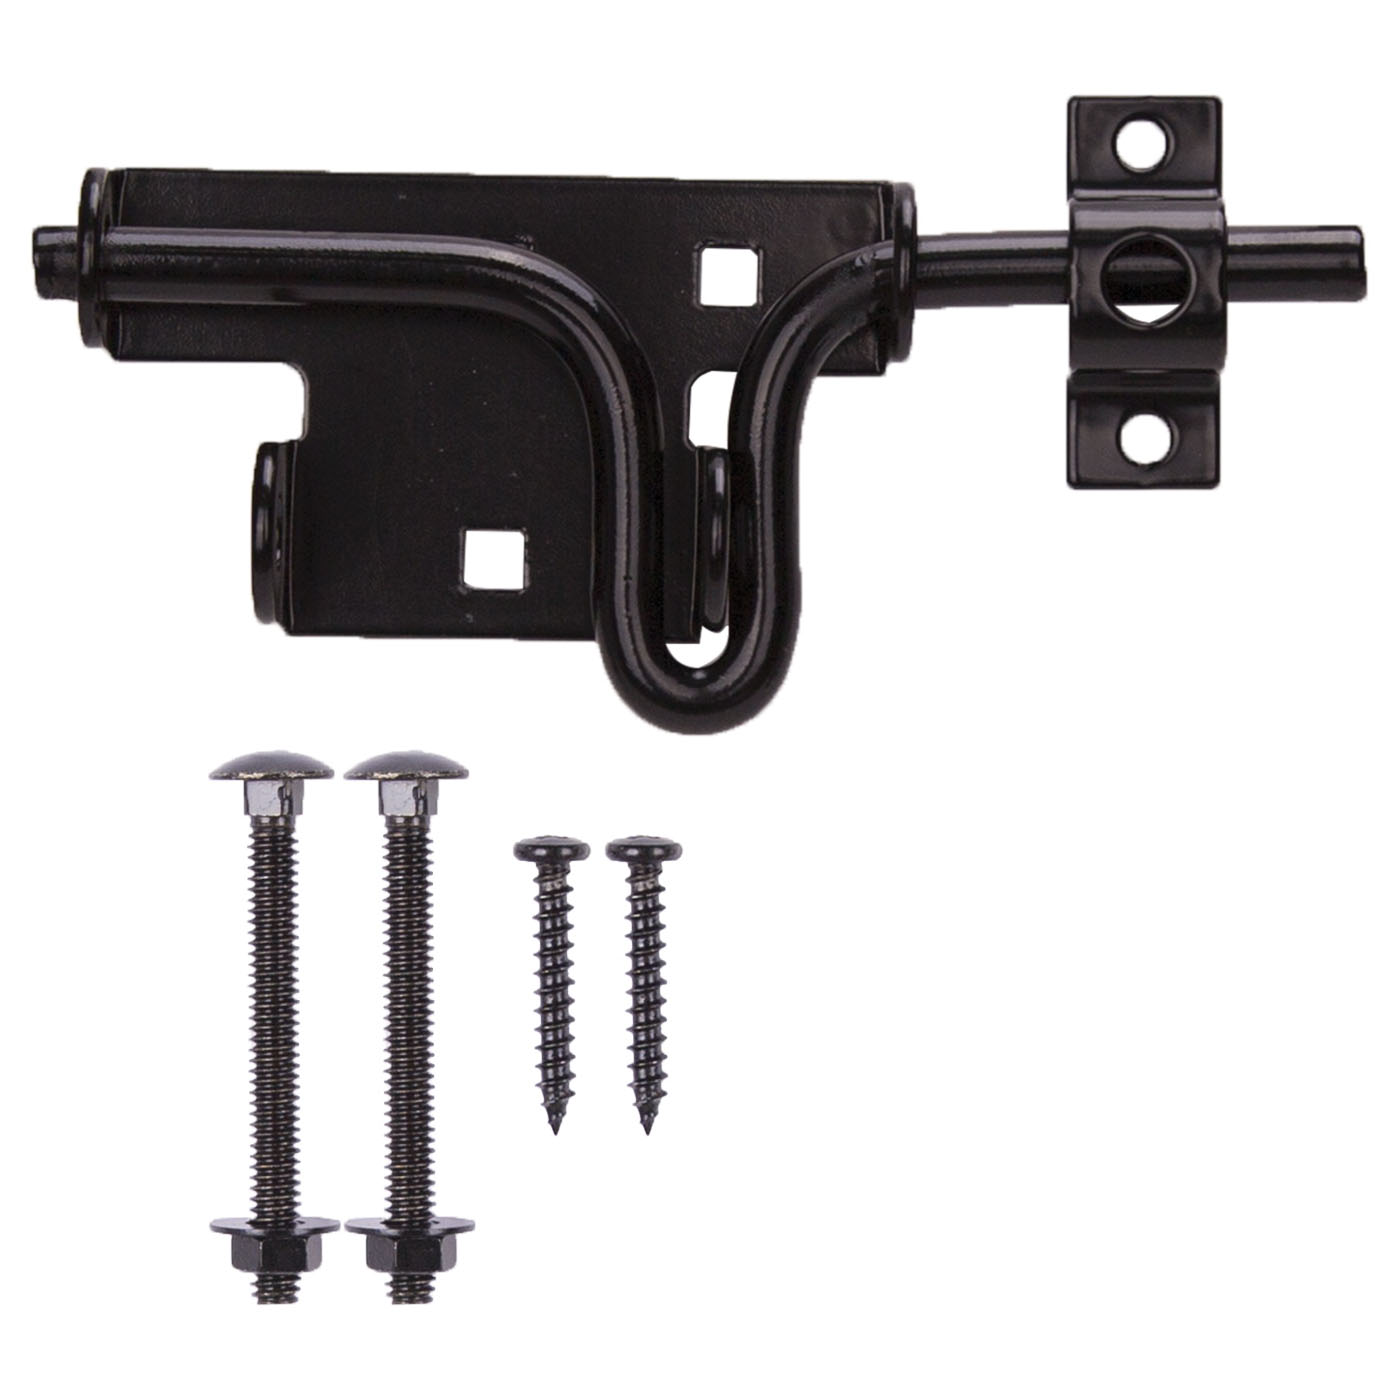 ProSource 33189PKS-PS Bolt Latch, 1-1/8 in Bolt Head, 6-1/2 in L Bolt, Steel, Powder-Coated